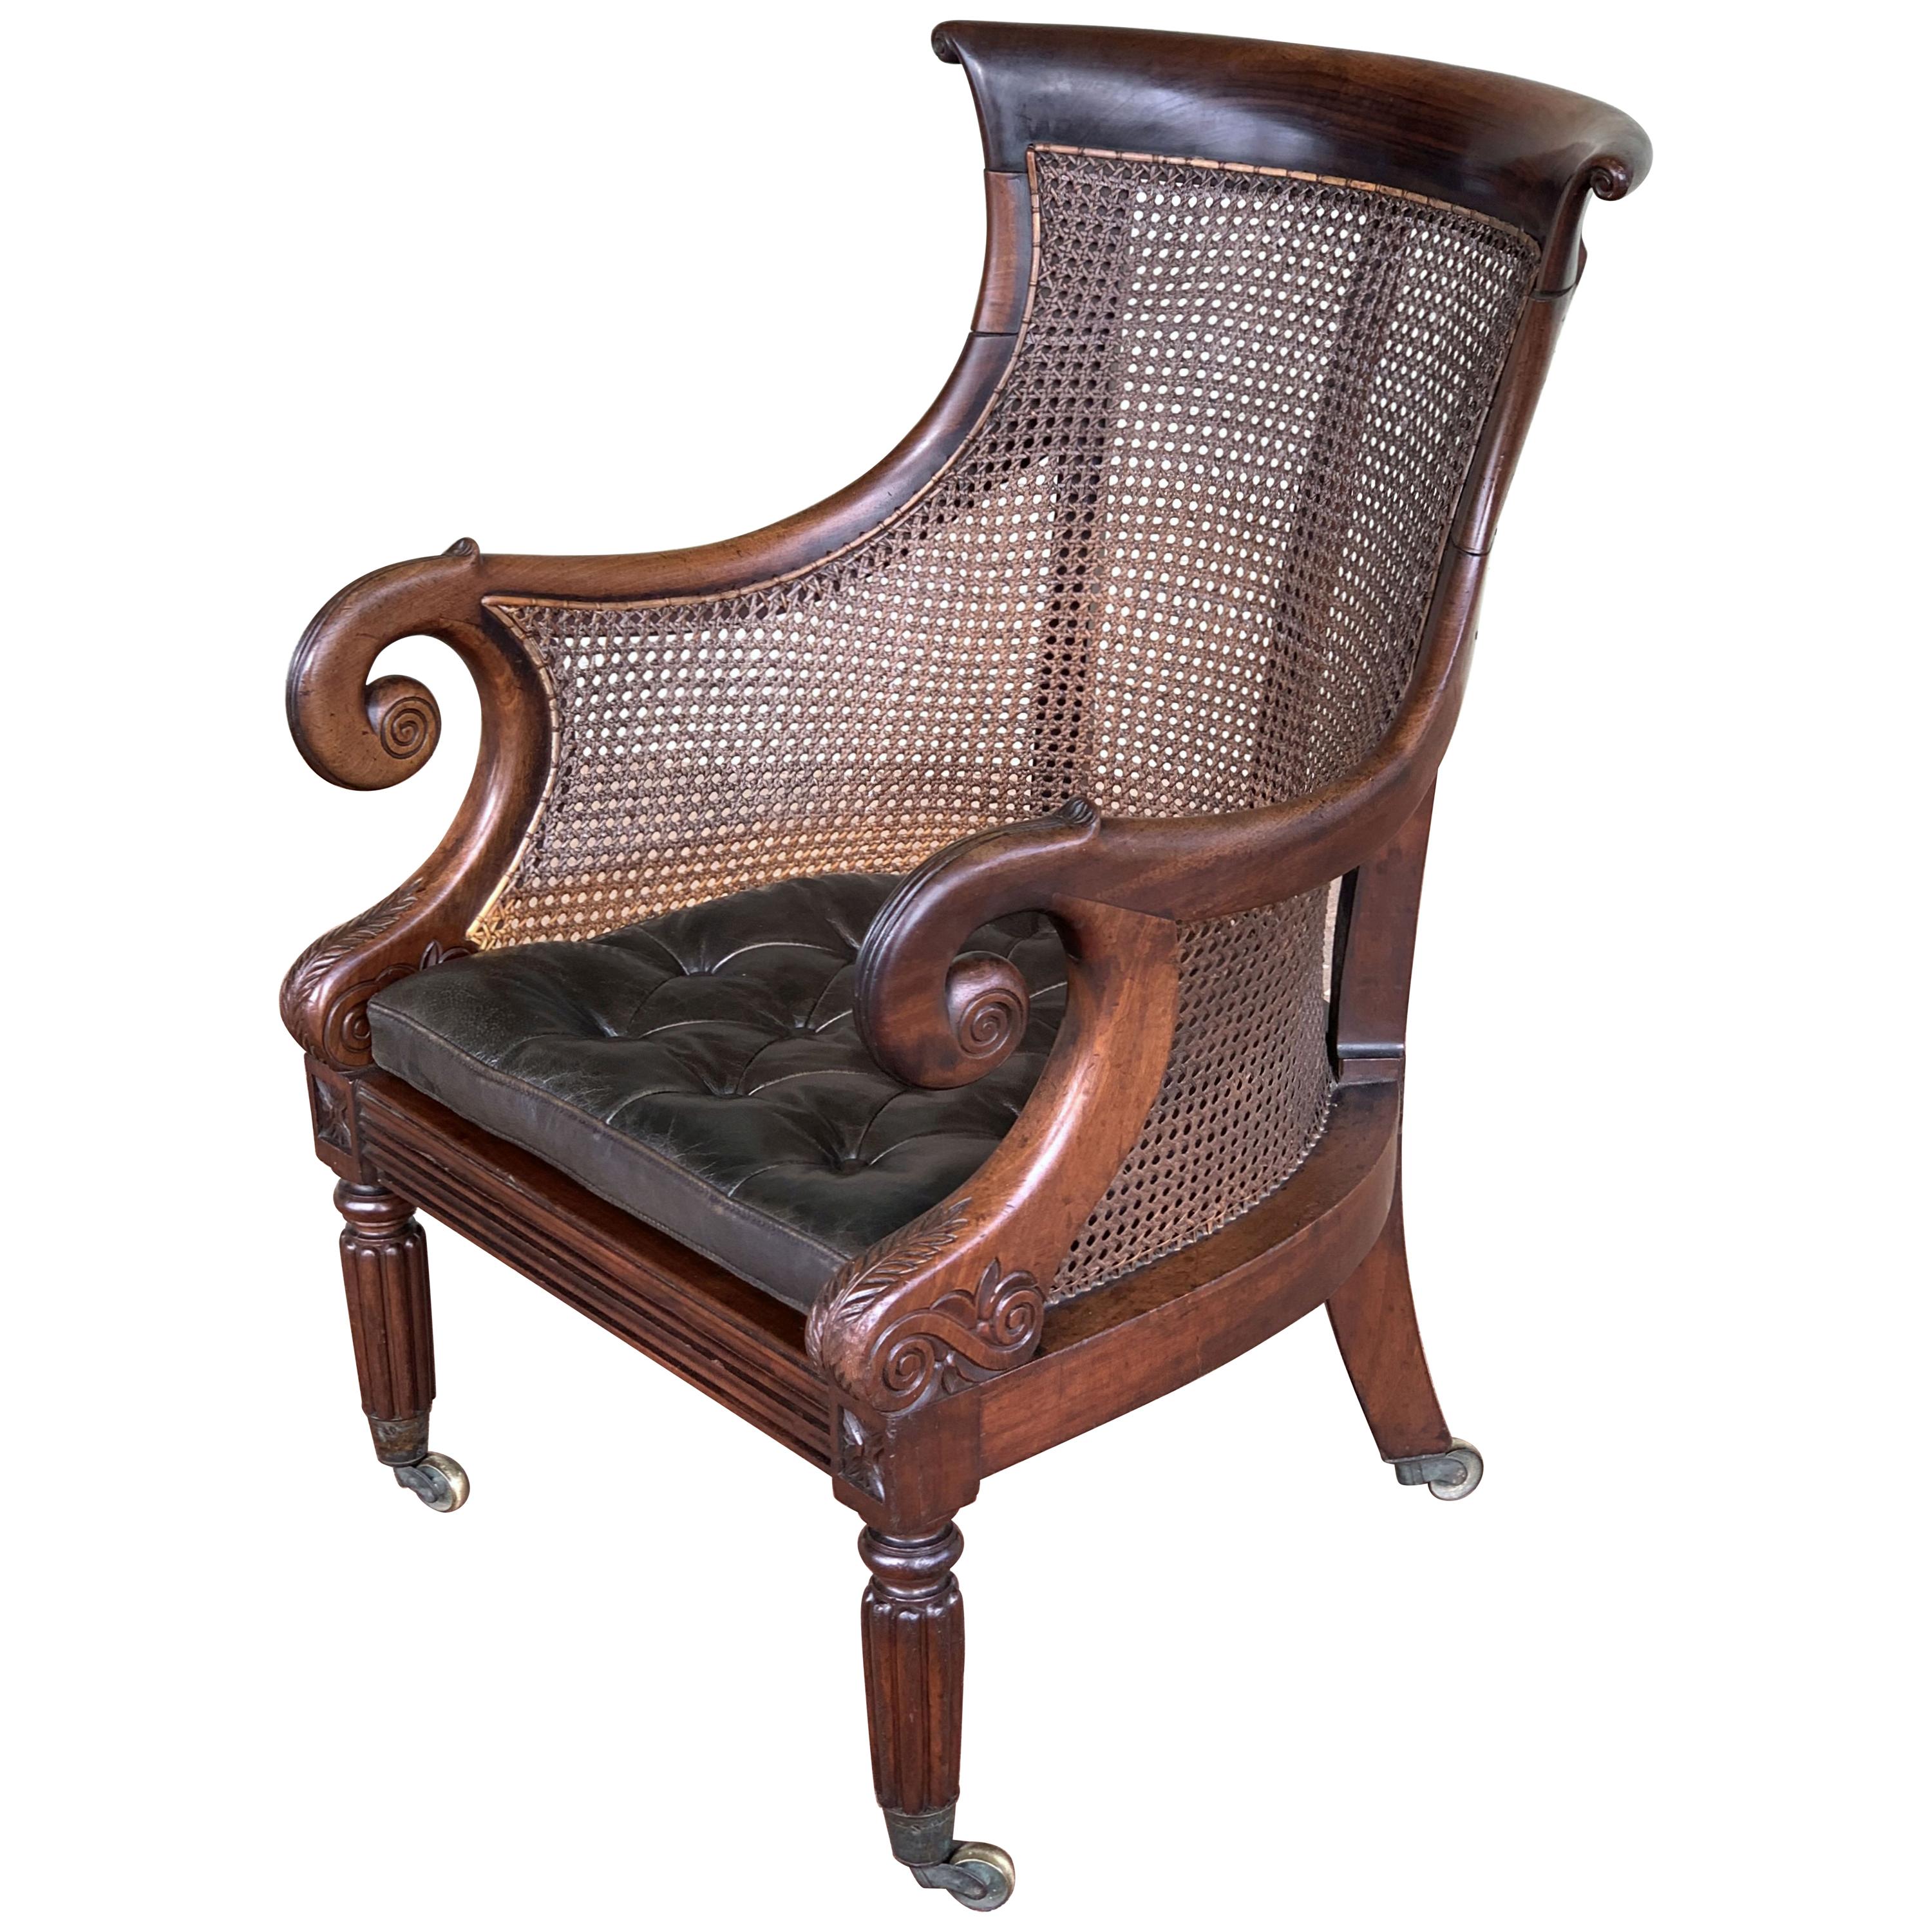 English Bergere Armchair of Caned Mahogany from the Regency Period